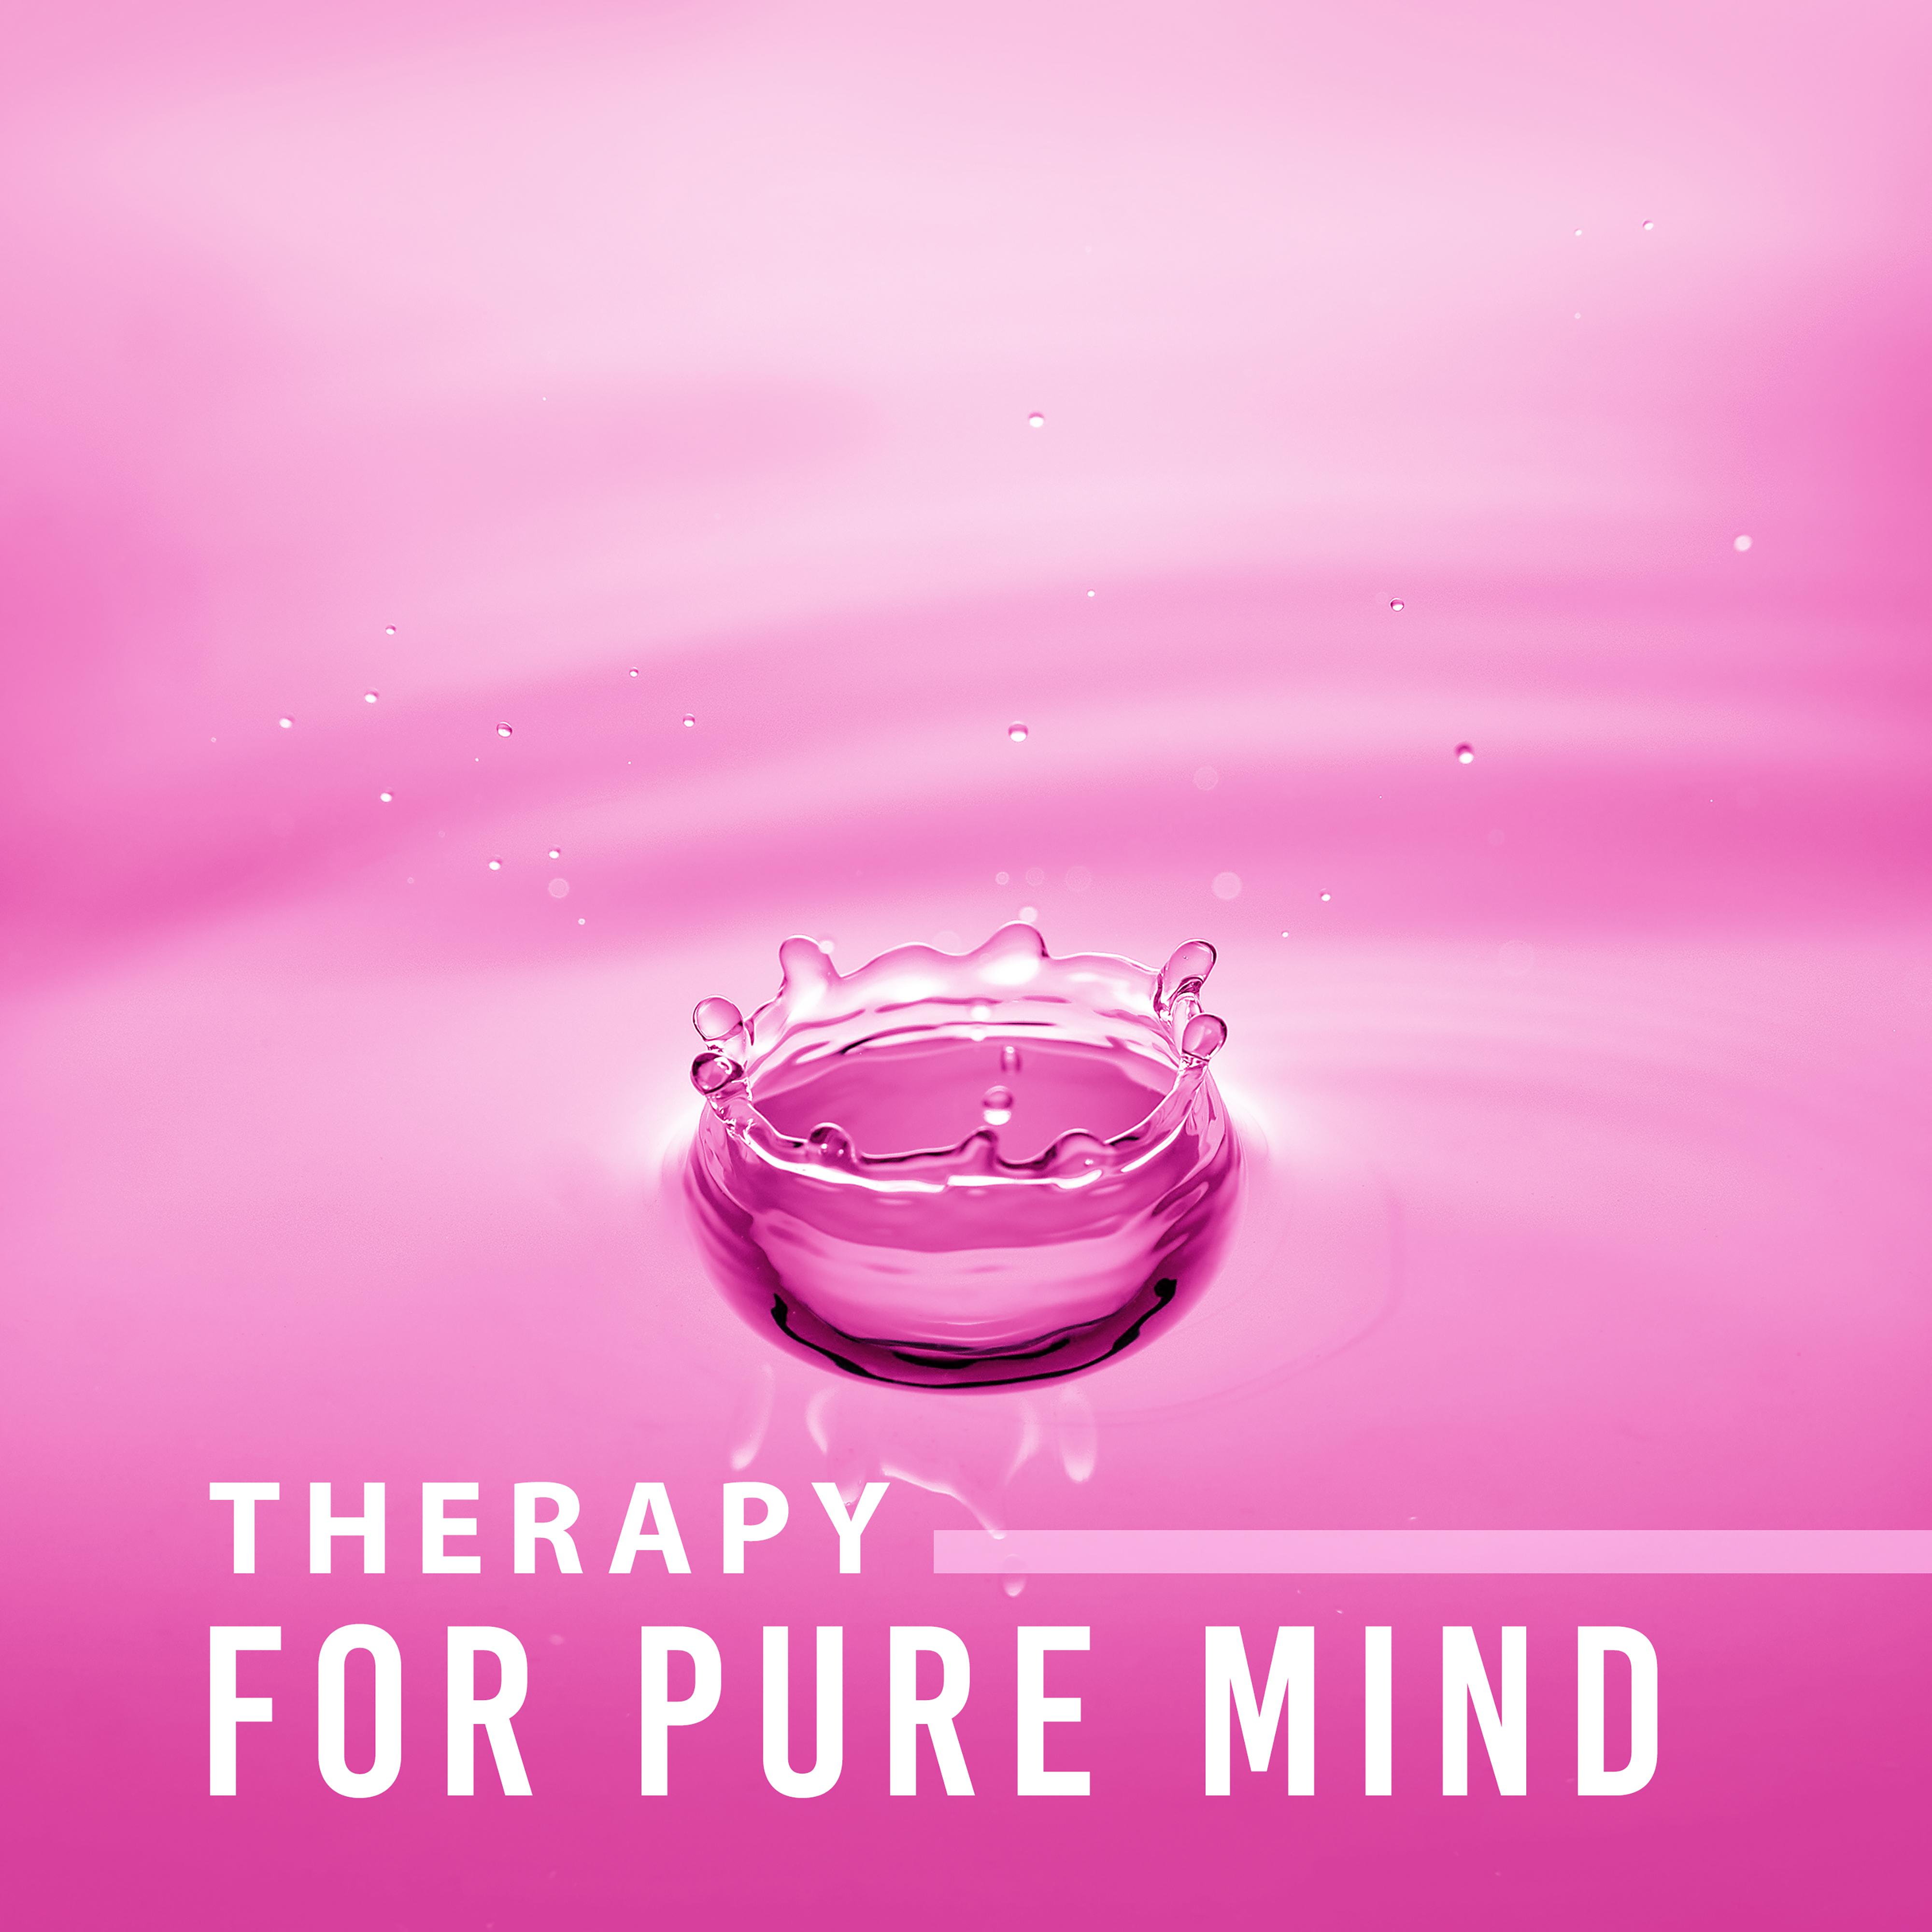 Therapy for Pure Mind – Relaxing Waves, Nature Sounds, Peaceful Music to Rest, Pure Sleep, Calm Down, Stress Free, Relief